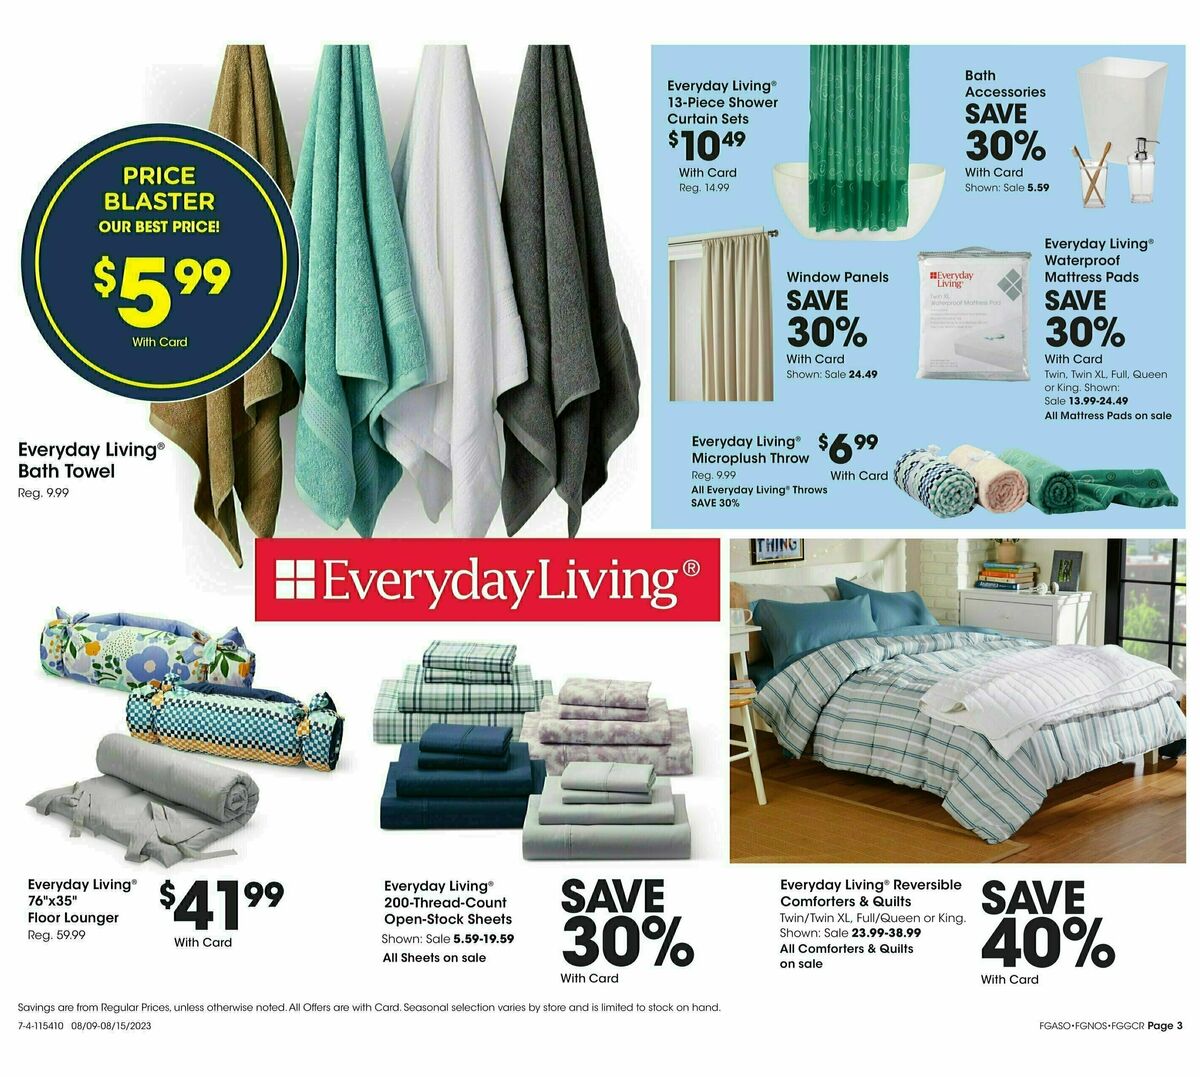 Fred Meyer General Merchandise Weekly Ad from August 9